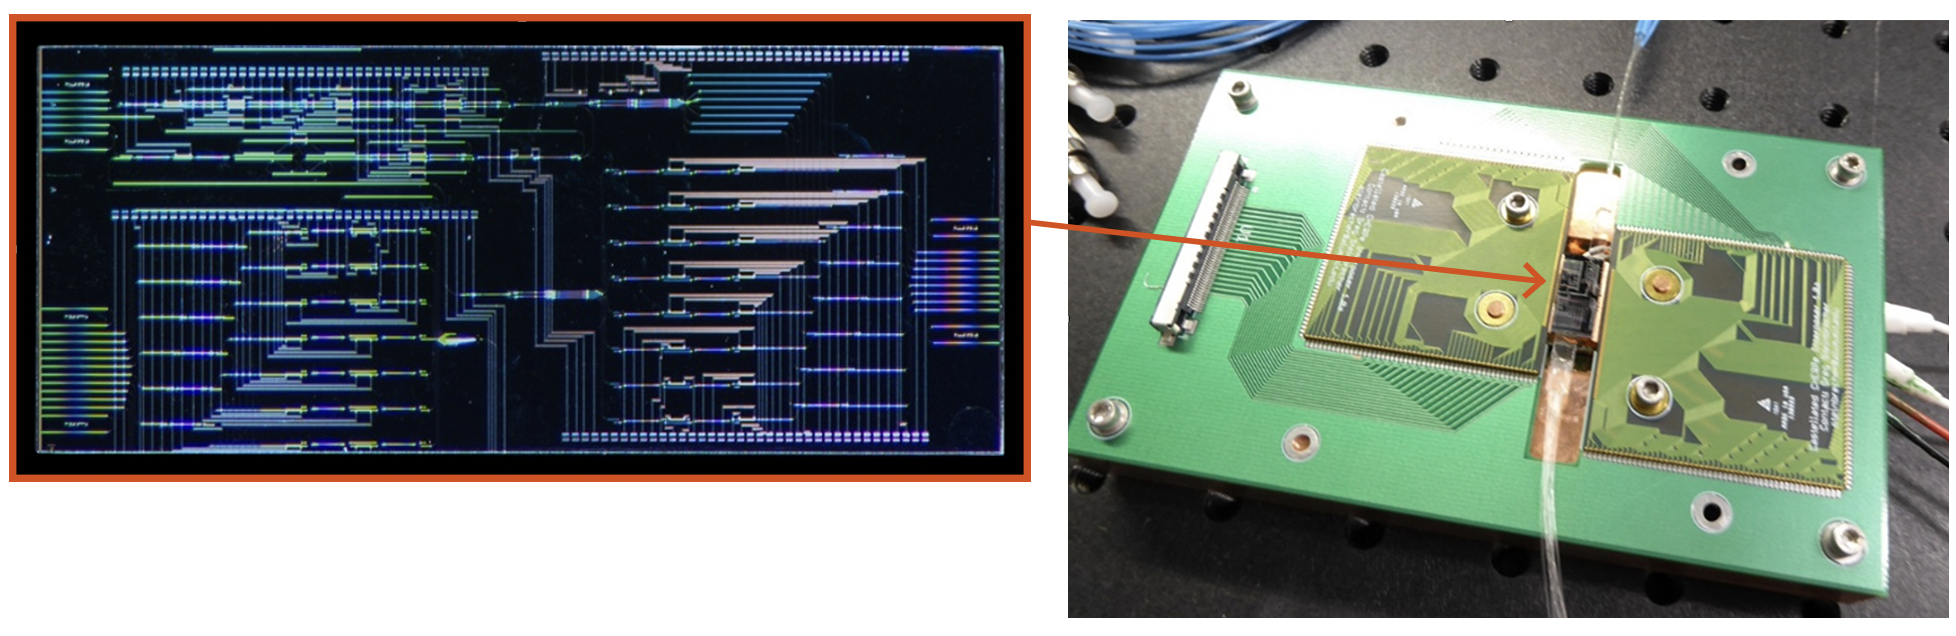 At left is an image of SiNx/SiO2-on-Si PIC, and at right, the PIC​ is integrated on a printed circuit interface board. The PIC was fabricated using the Laboratory's 200-mm silicon fabrication toolset, and contains approximately 80 components. 